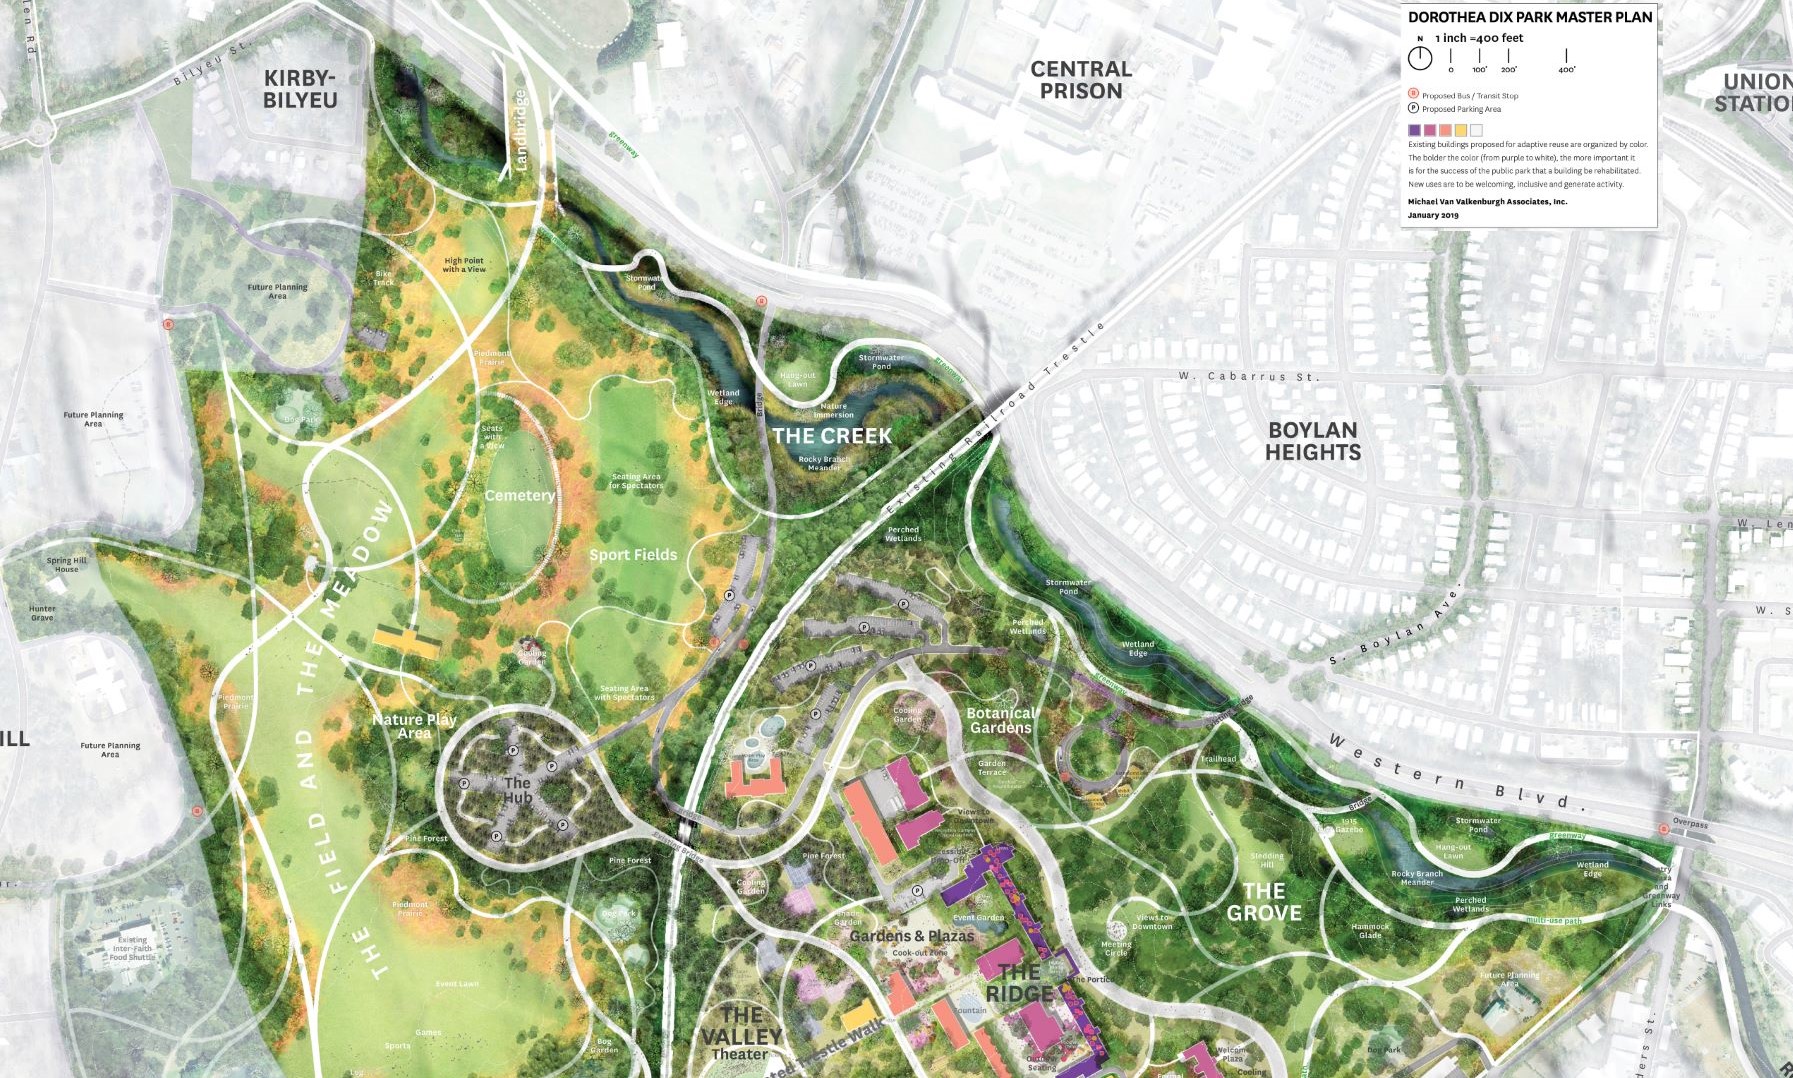 Rock Branch 'Creek' project extents from Dix Park's Master Plan